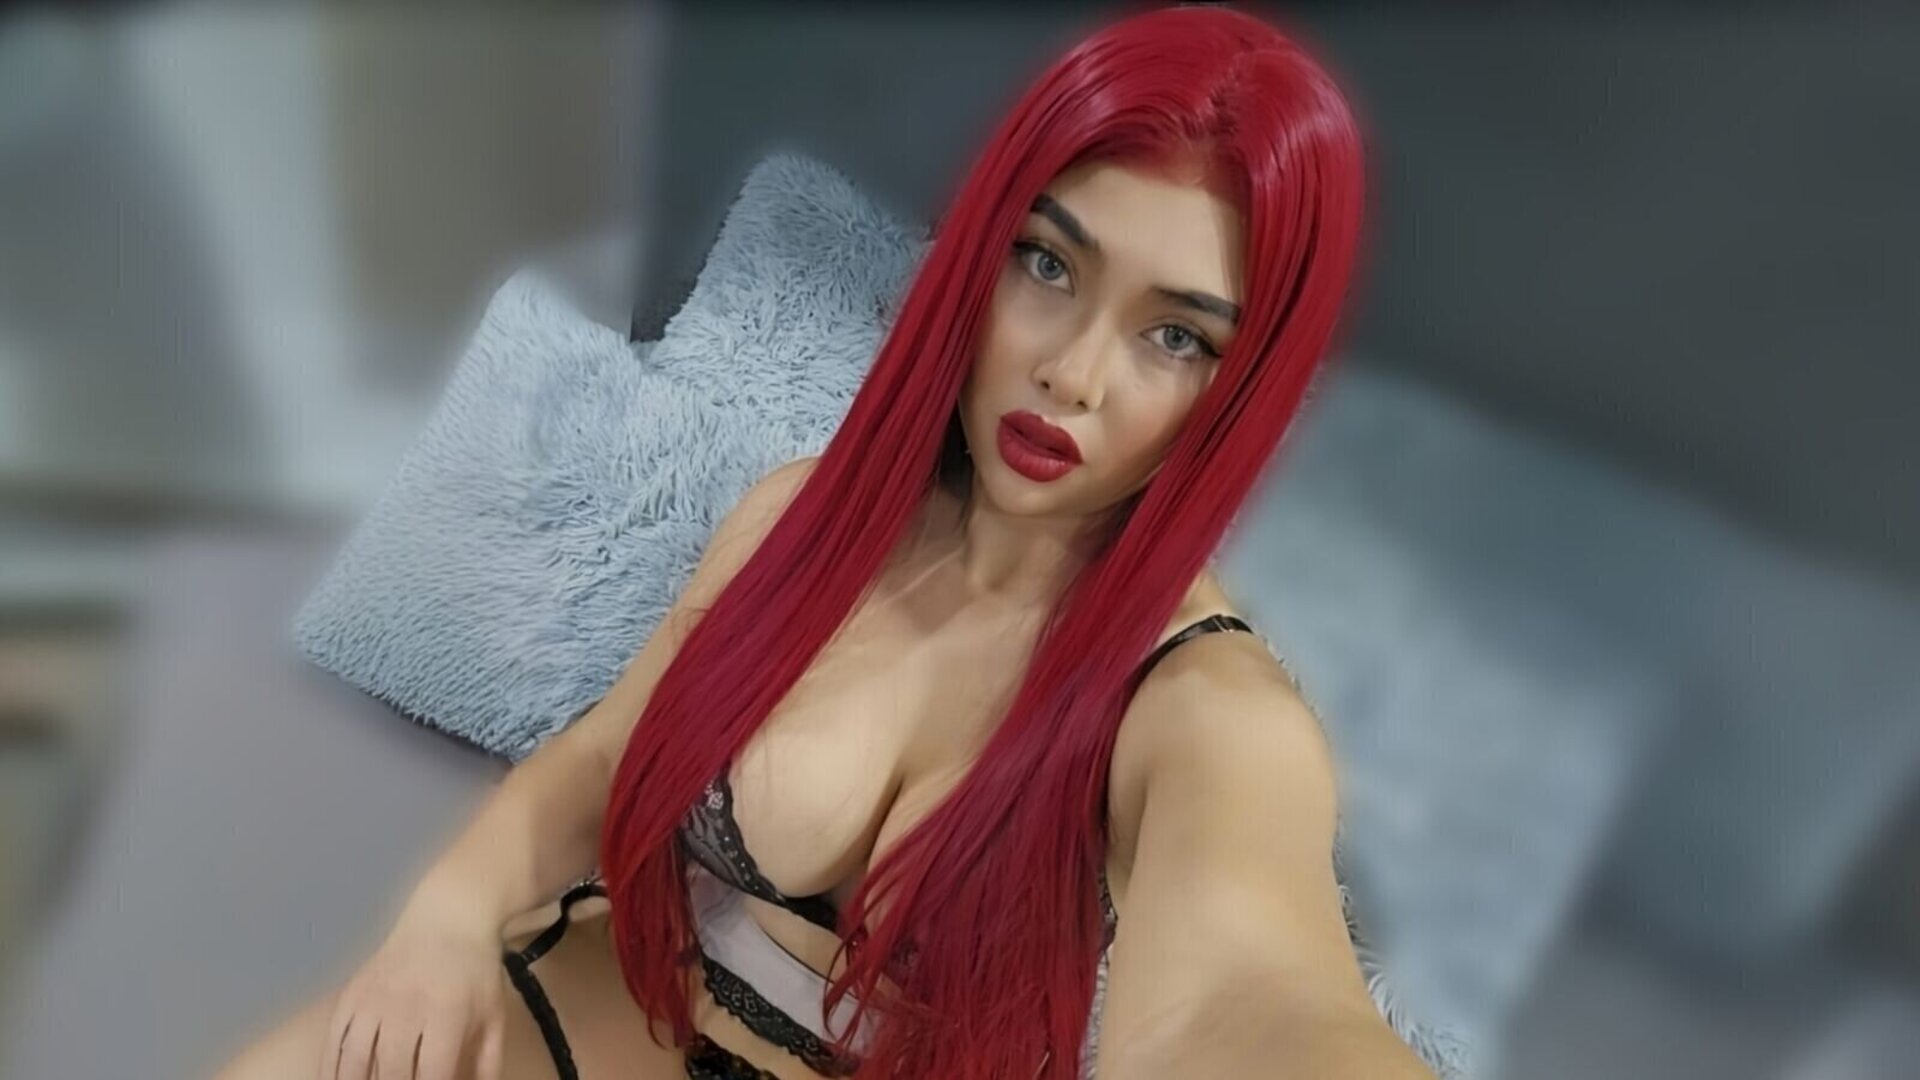 ArieFerre's Live Nude Chat